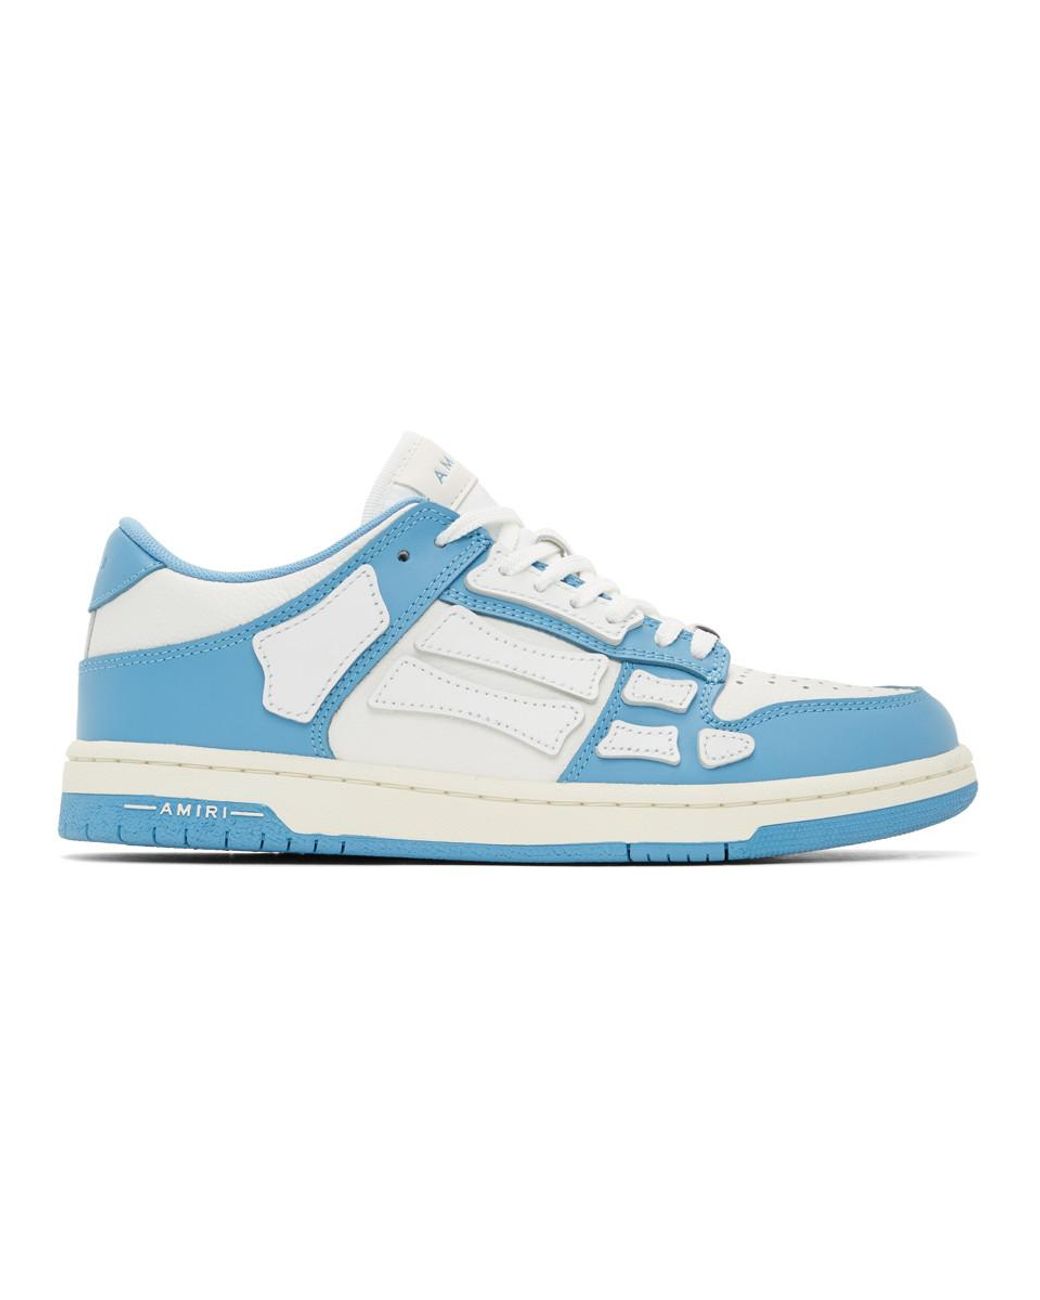 Amiri Leather Blue And White Skel Top Low Sneakers for Men - Lyst